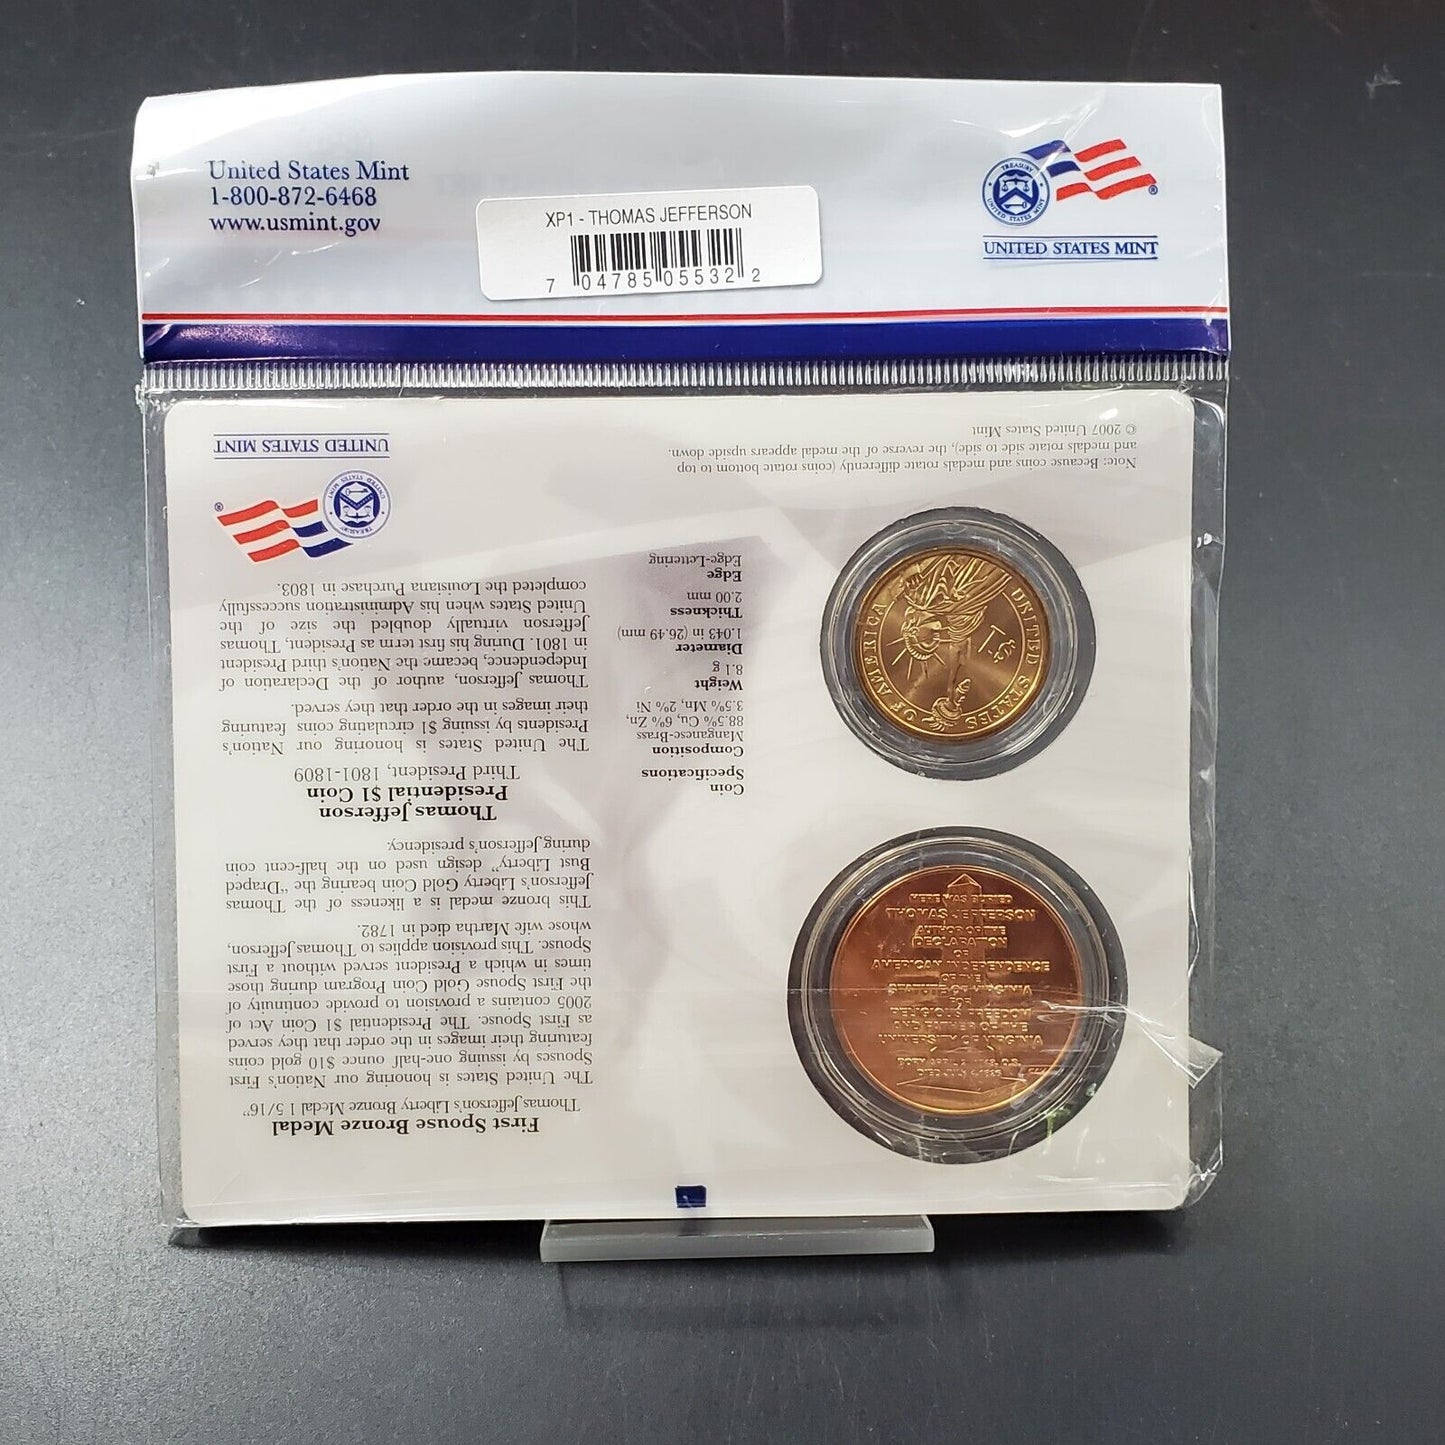 U.S. Mint Presidential $1 Coin and Spouse Medal Set: Thomas Jefferson OGP